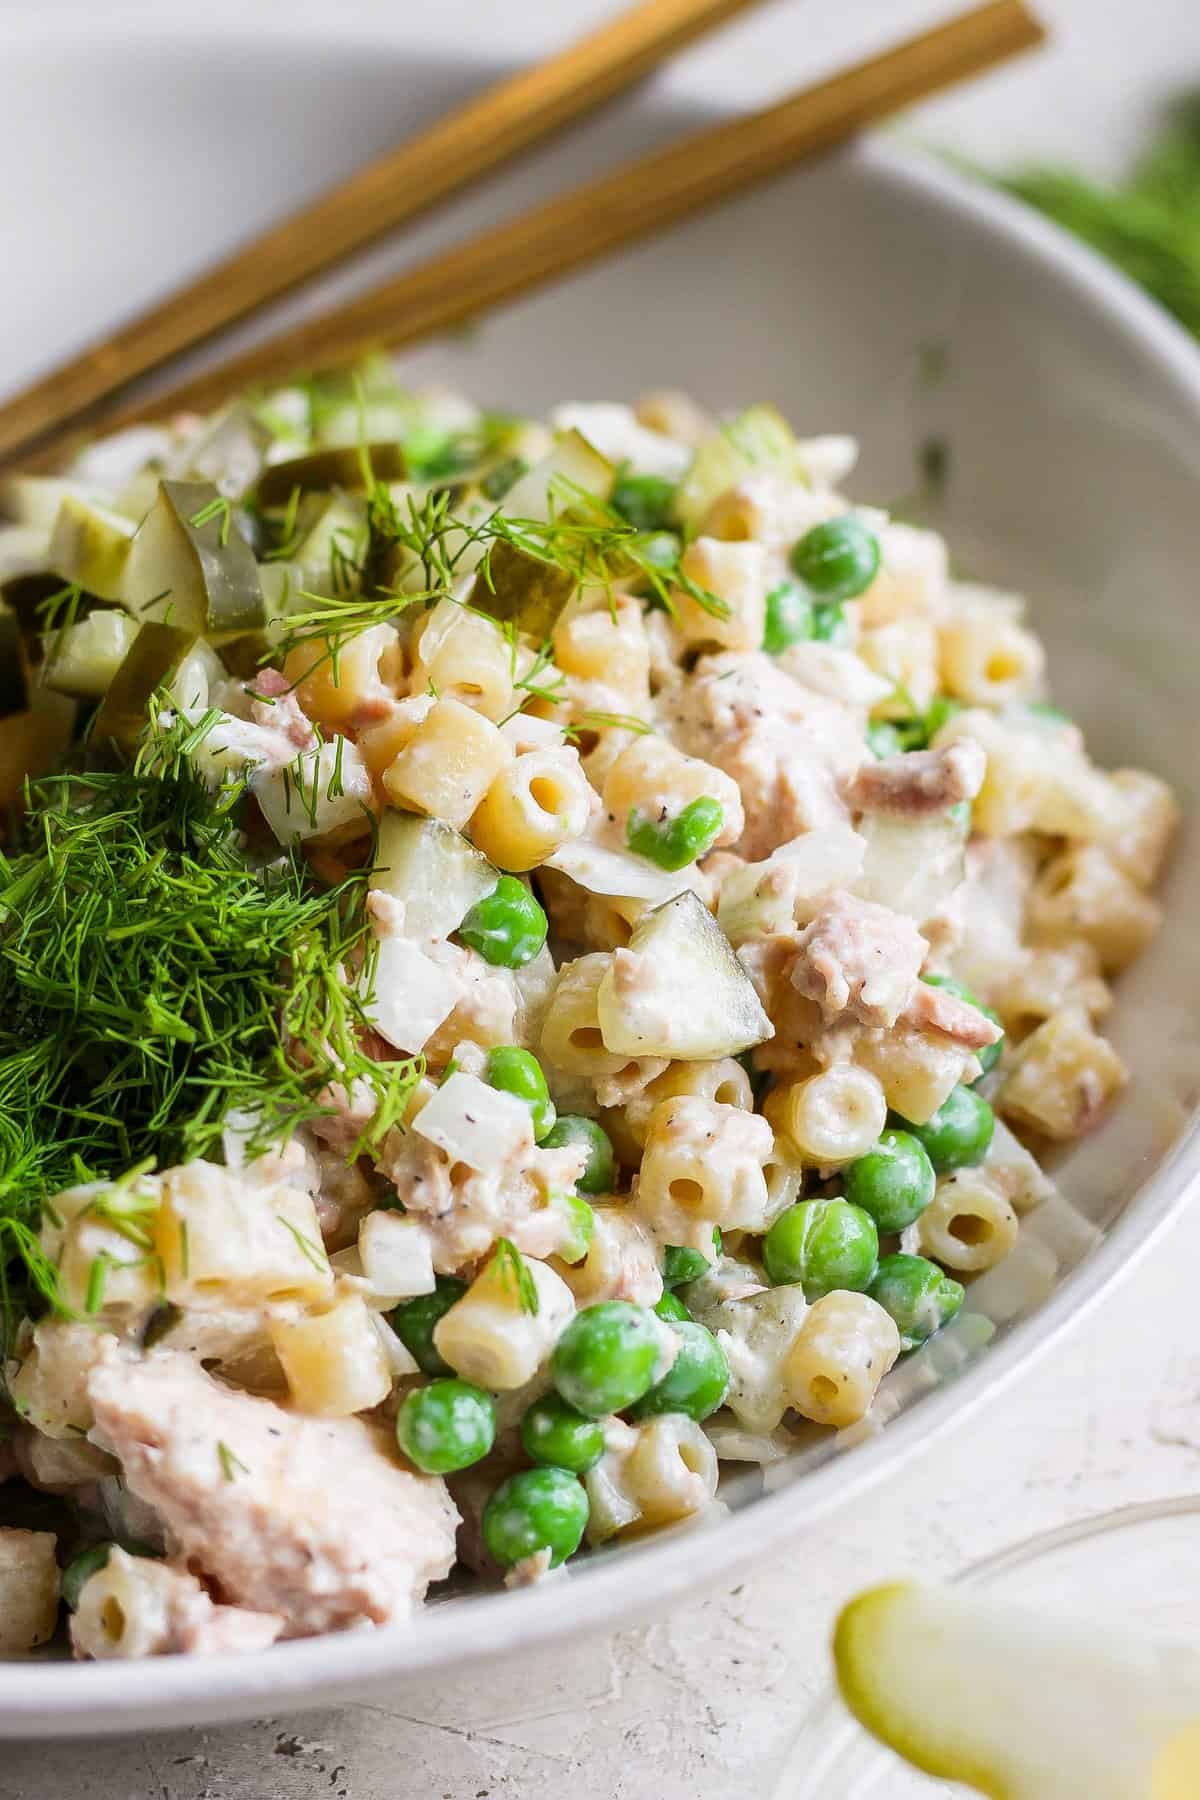 A bowl of tuna pasta salad with peas and dill, garnished with fresh herbs and served with c،psticks.